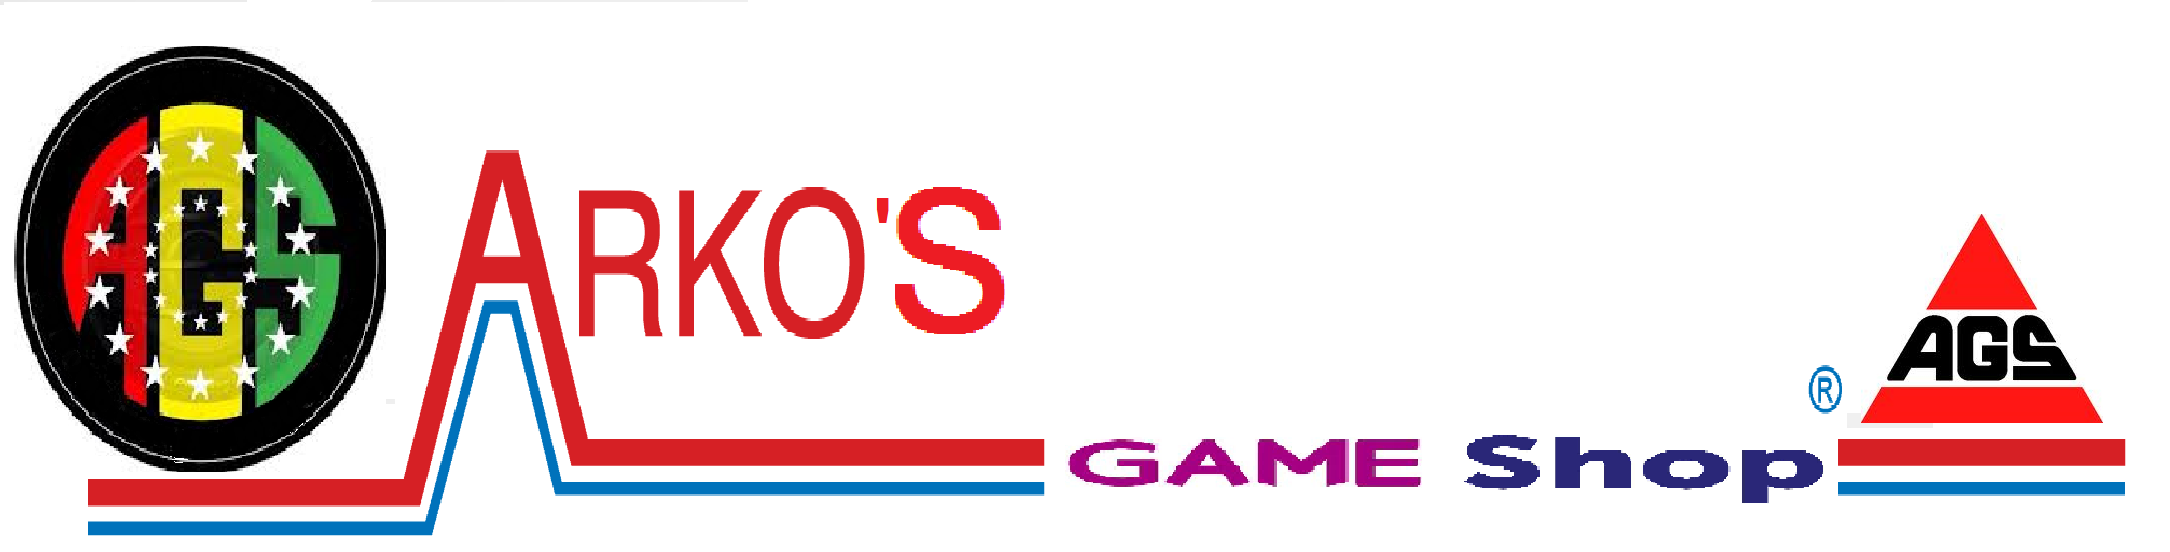 AGS - Arko s Game Shop is taking Online Orders large image 0